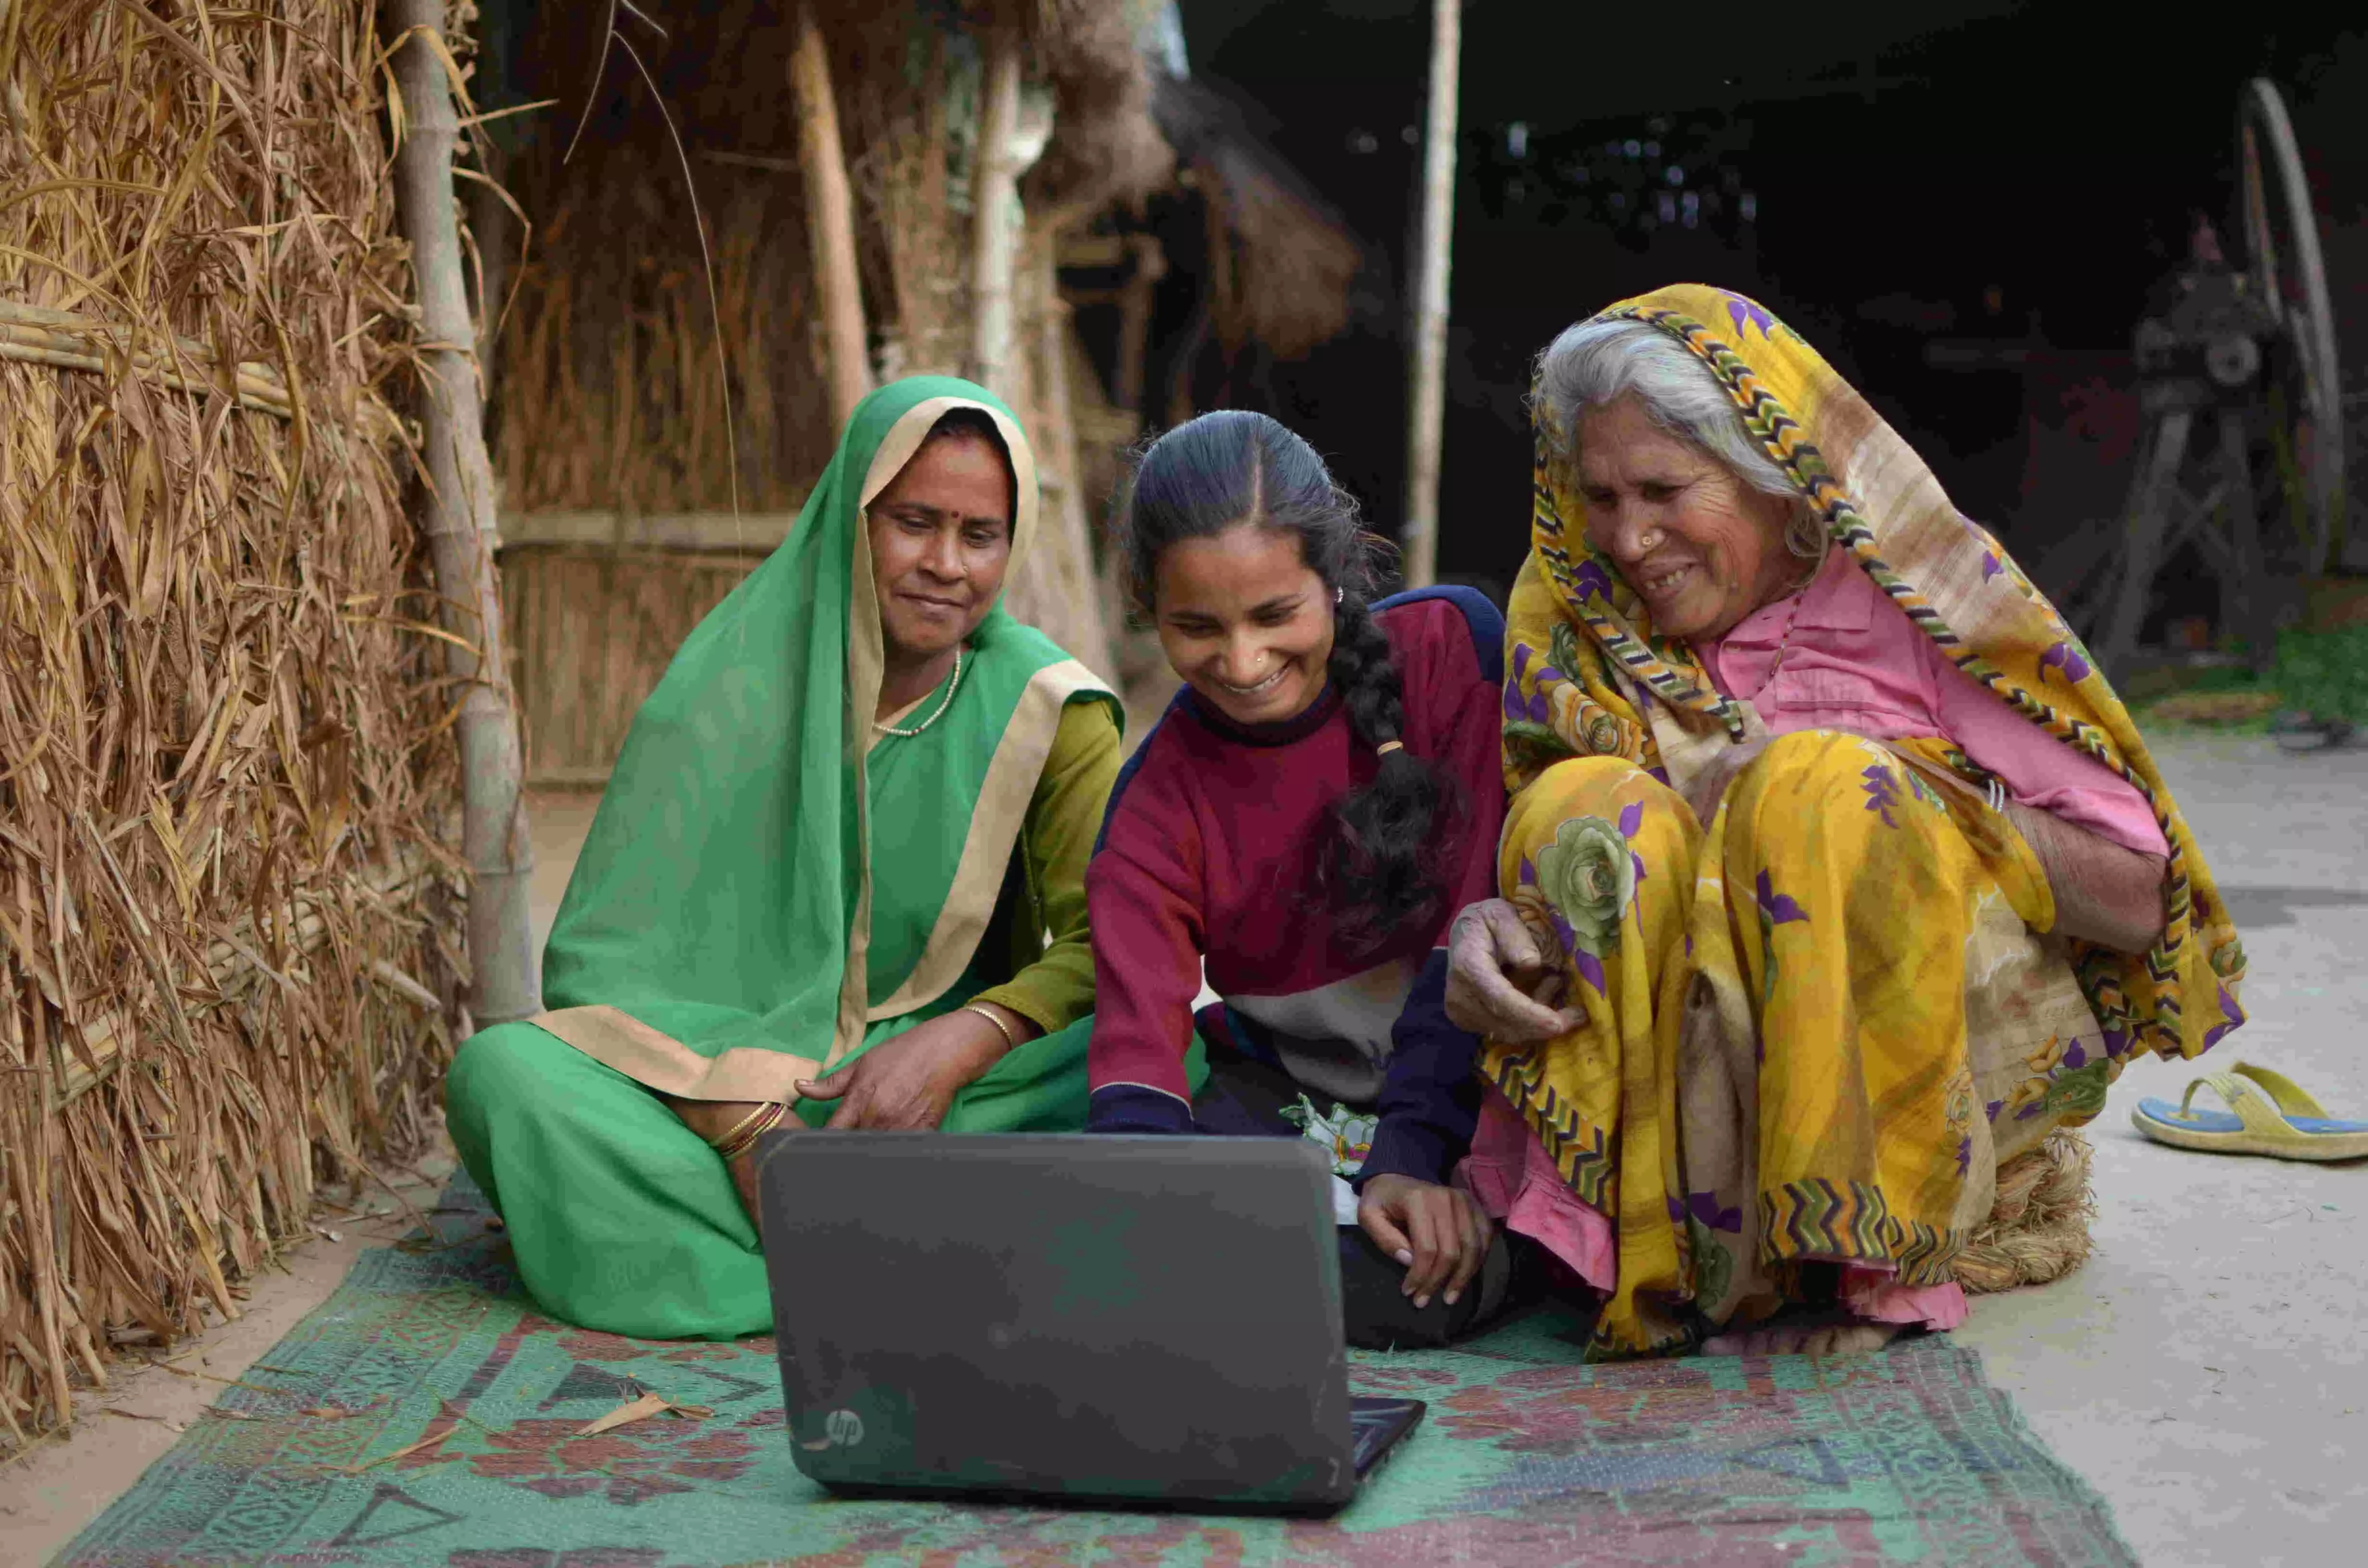 20% more internet users in rural India than urban areas; strong upsurge in female internet users in villages: Study